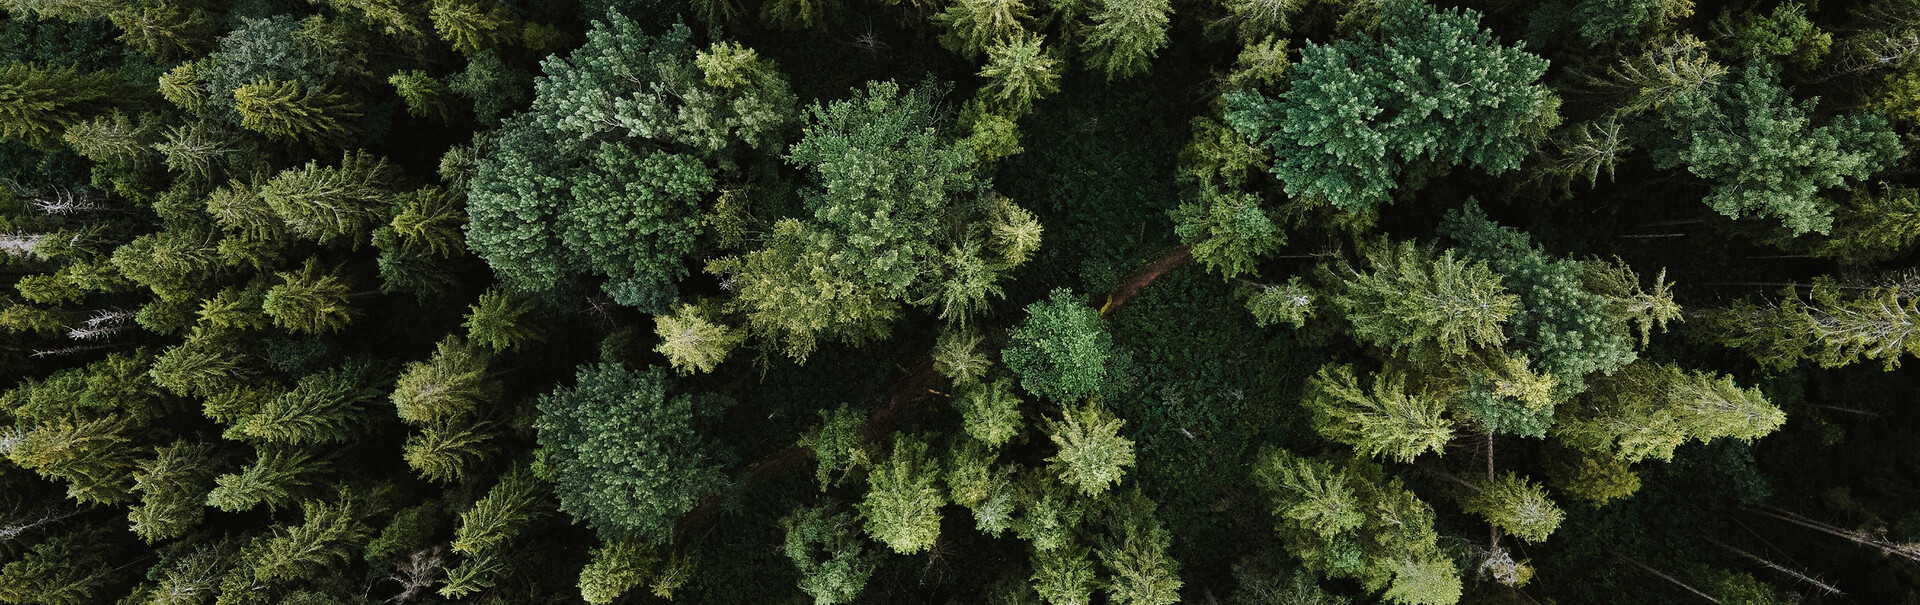 aerial view of an conifer forest